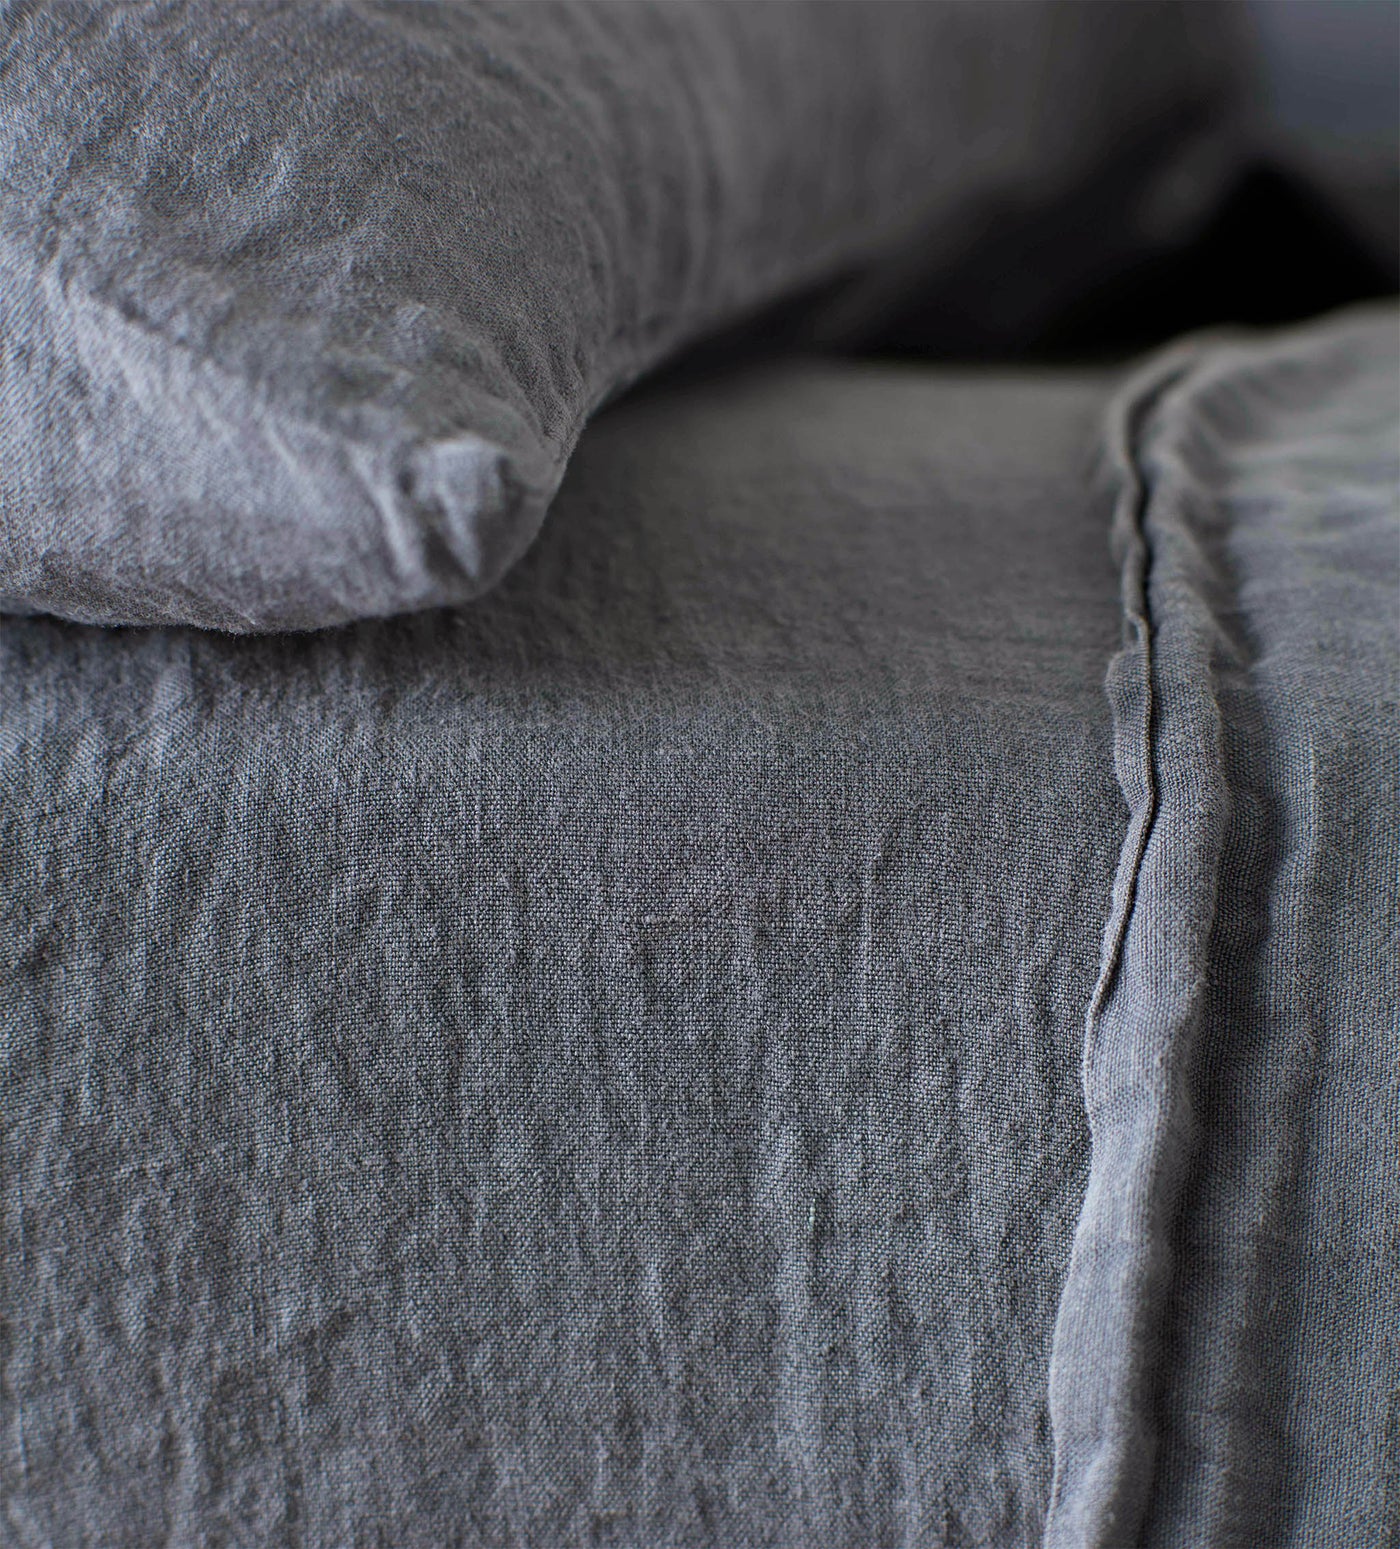 French Blue 100% Linen Bed Linen